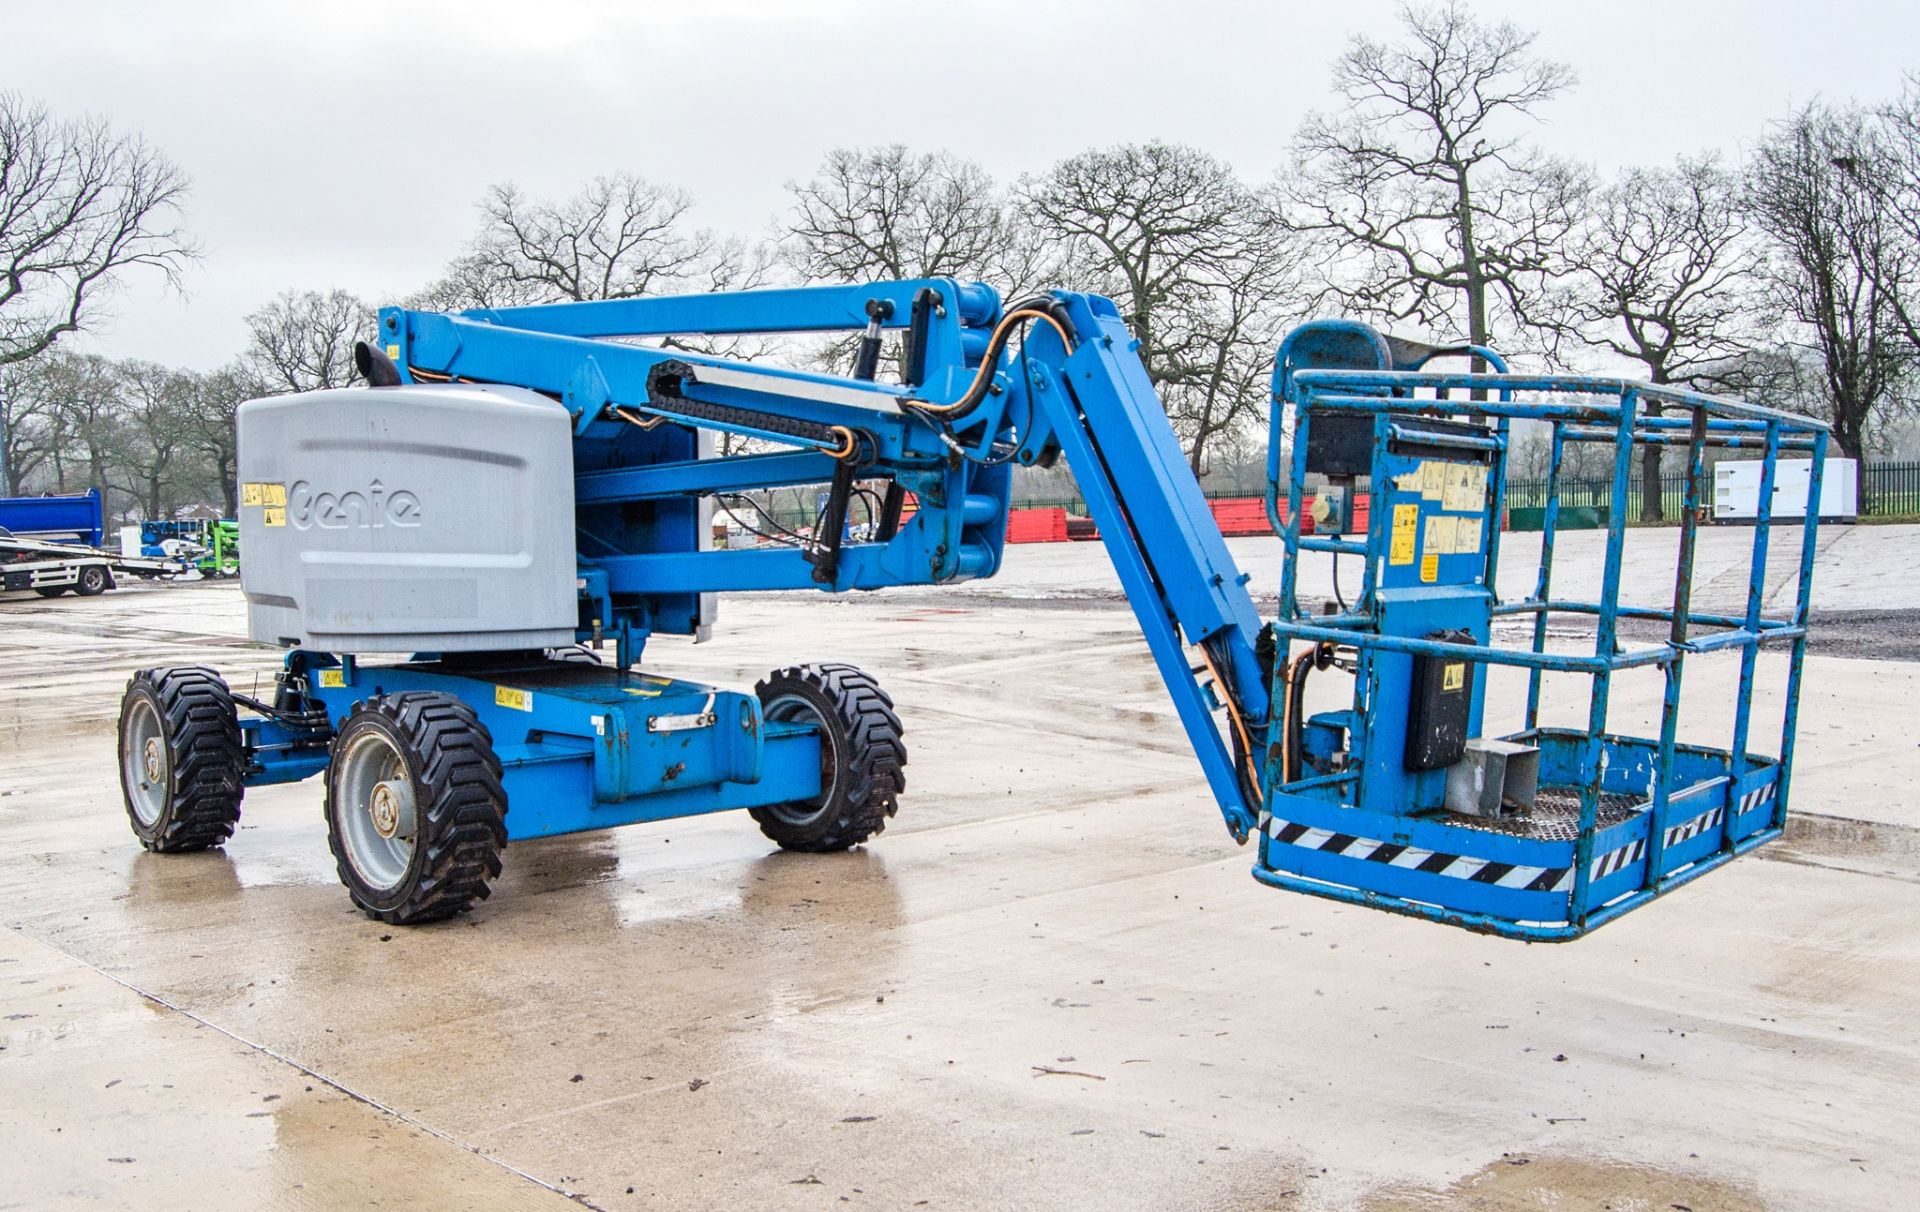 Genie Z45/25J diesel/battery electric 4 wheel drive articulated boom lift access platform Year: 2014 - Image 2 of 19